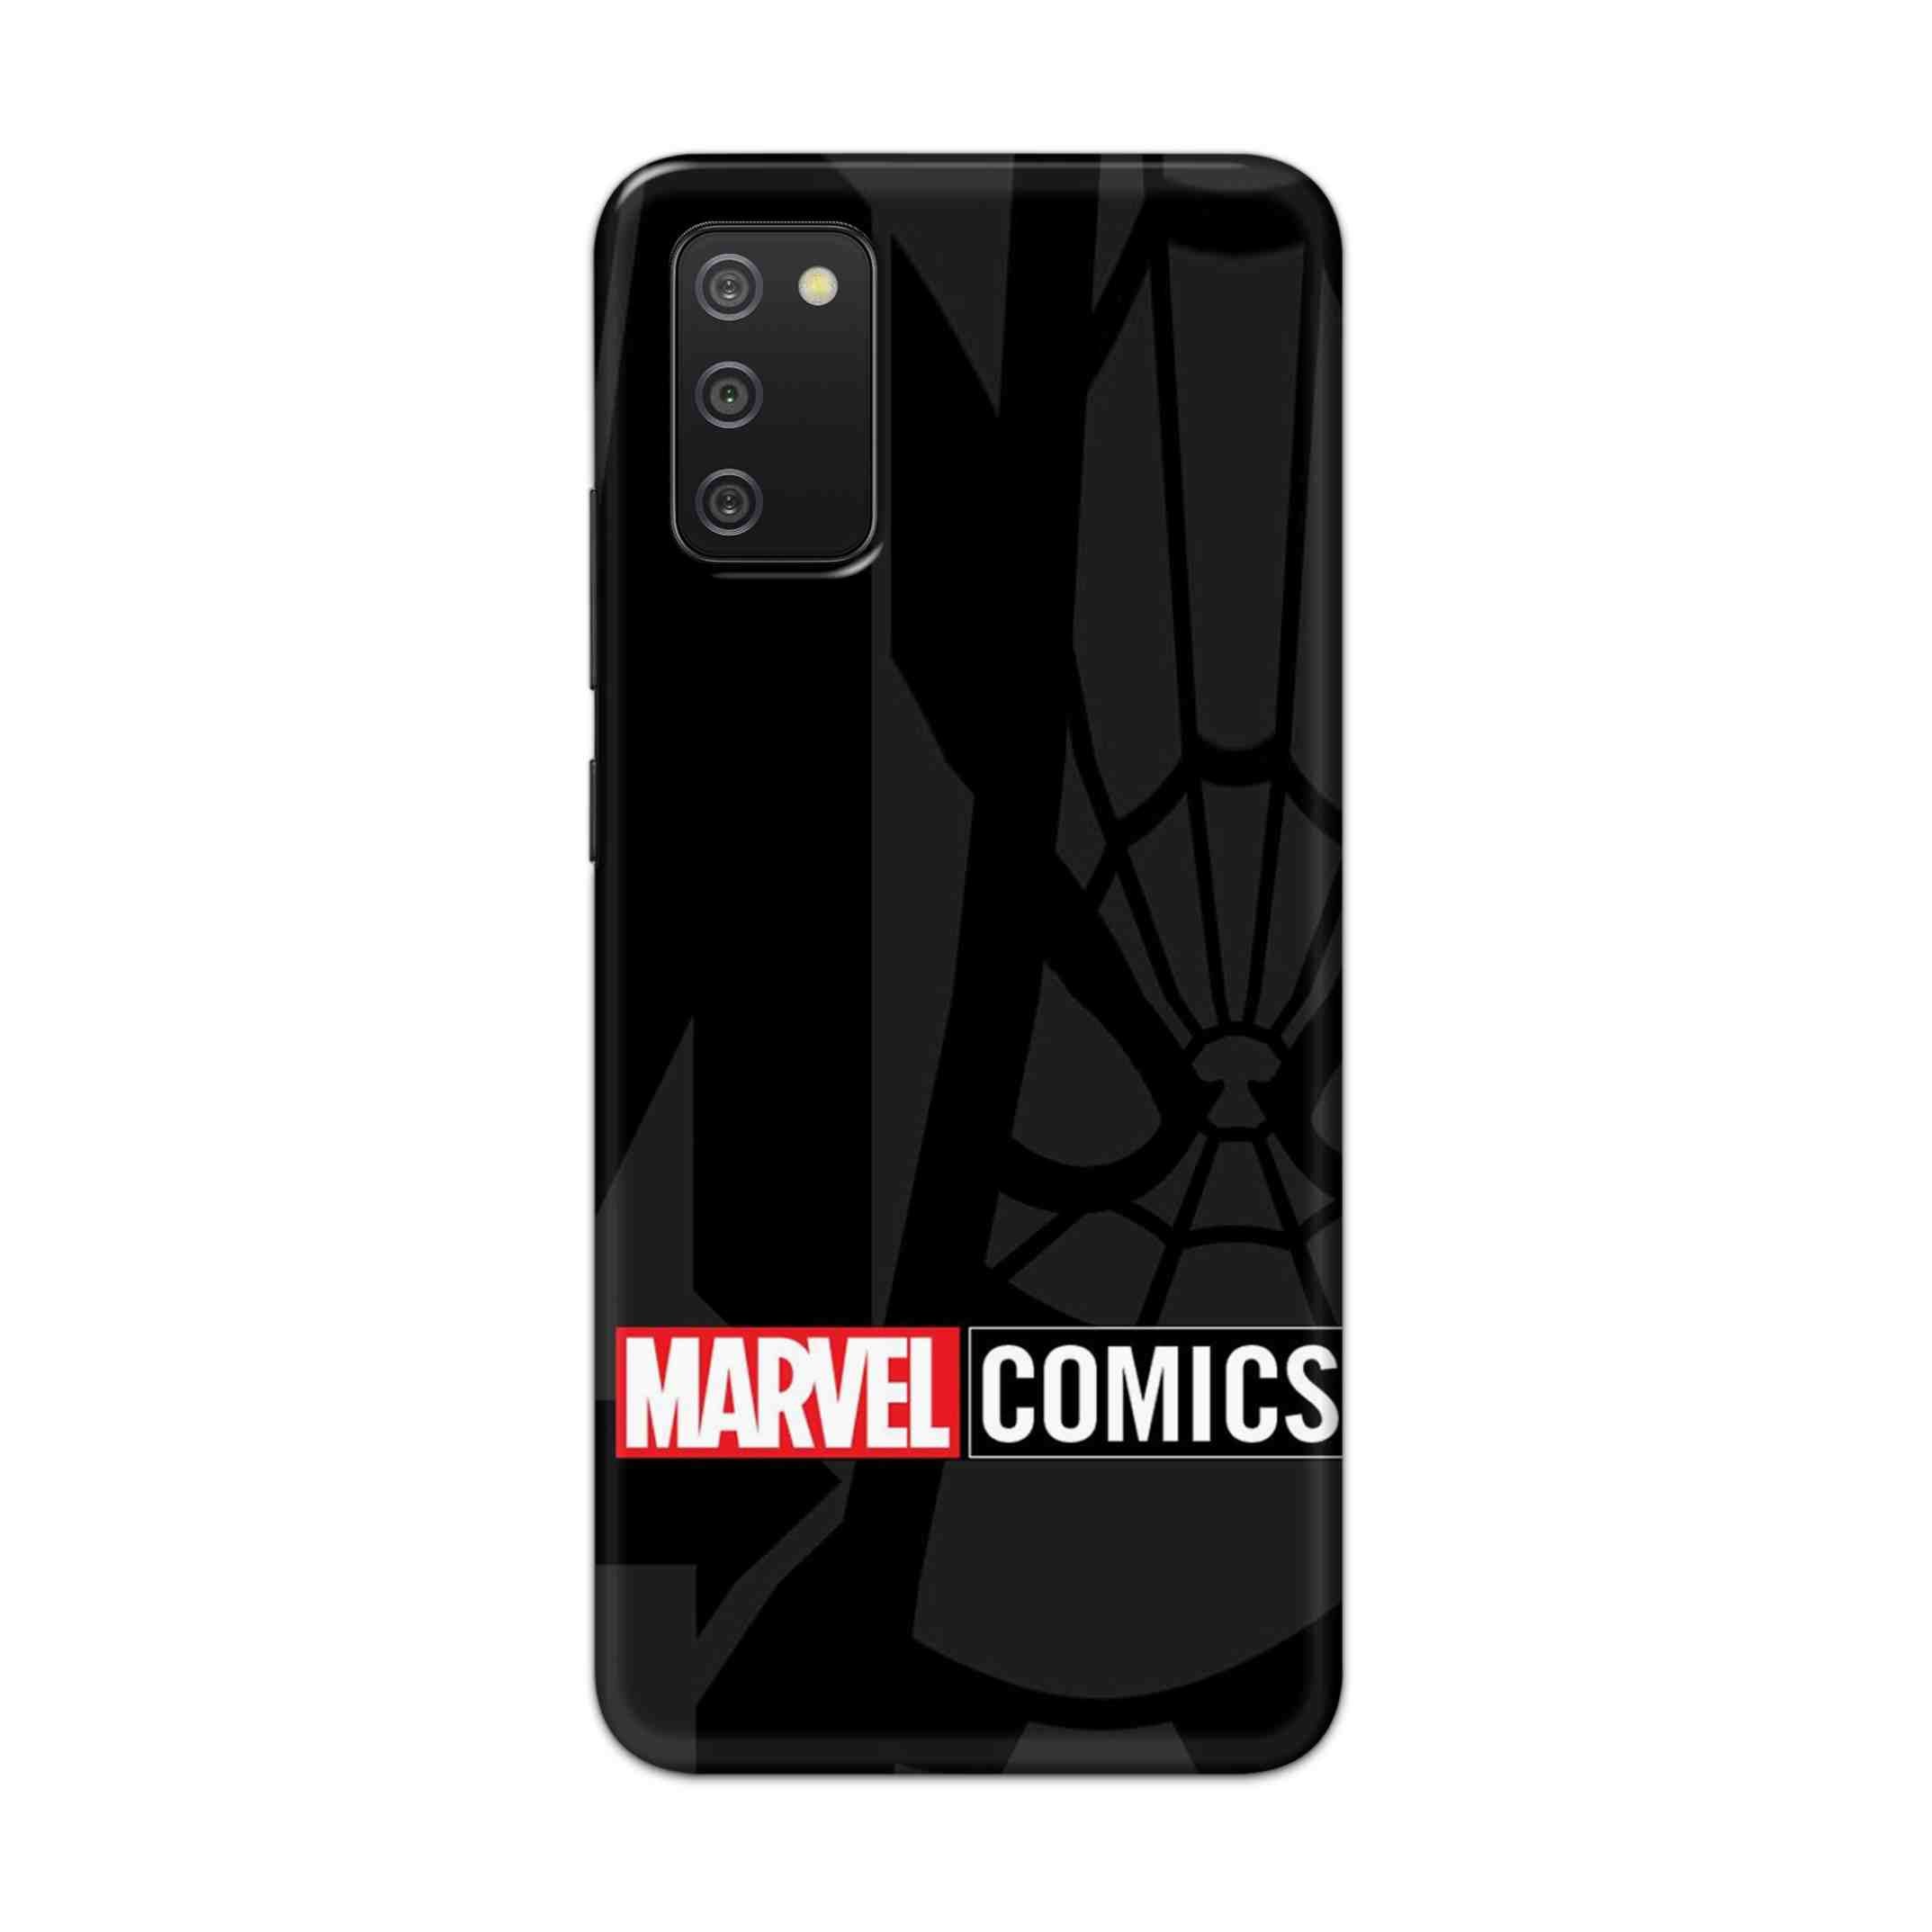 Buy Marvel Comics Hard Back Mobile Phone Case Cover For Samsung Galaxy M02s Online